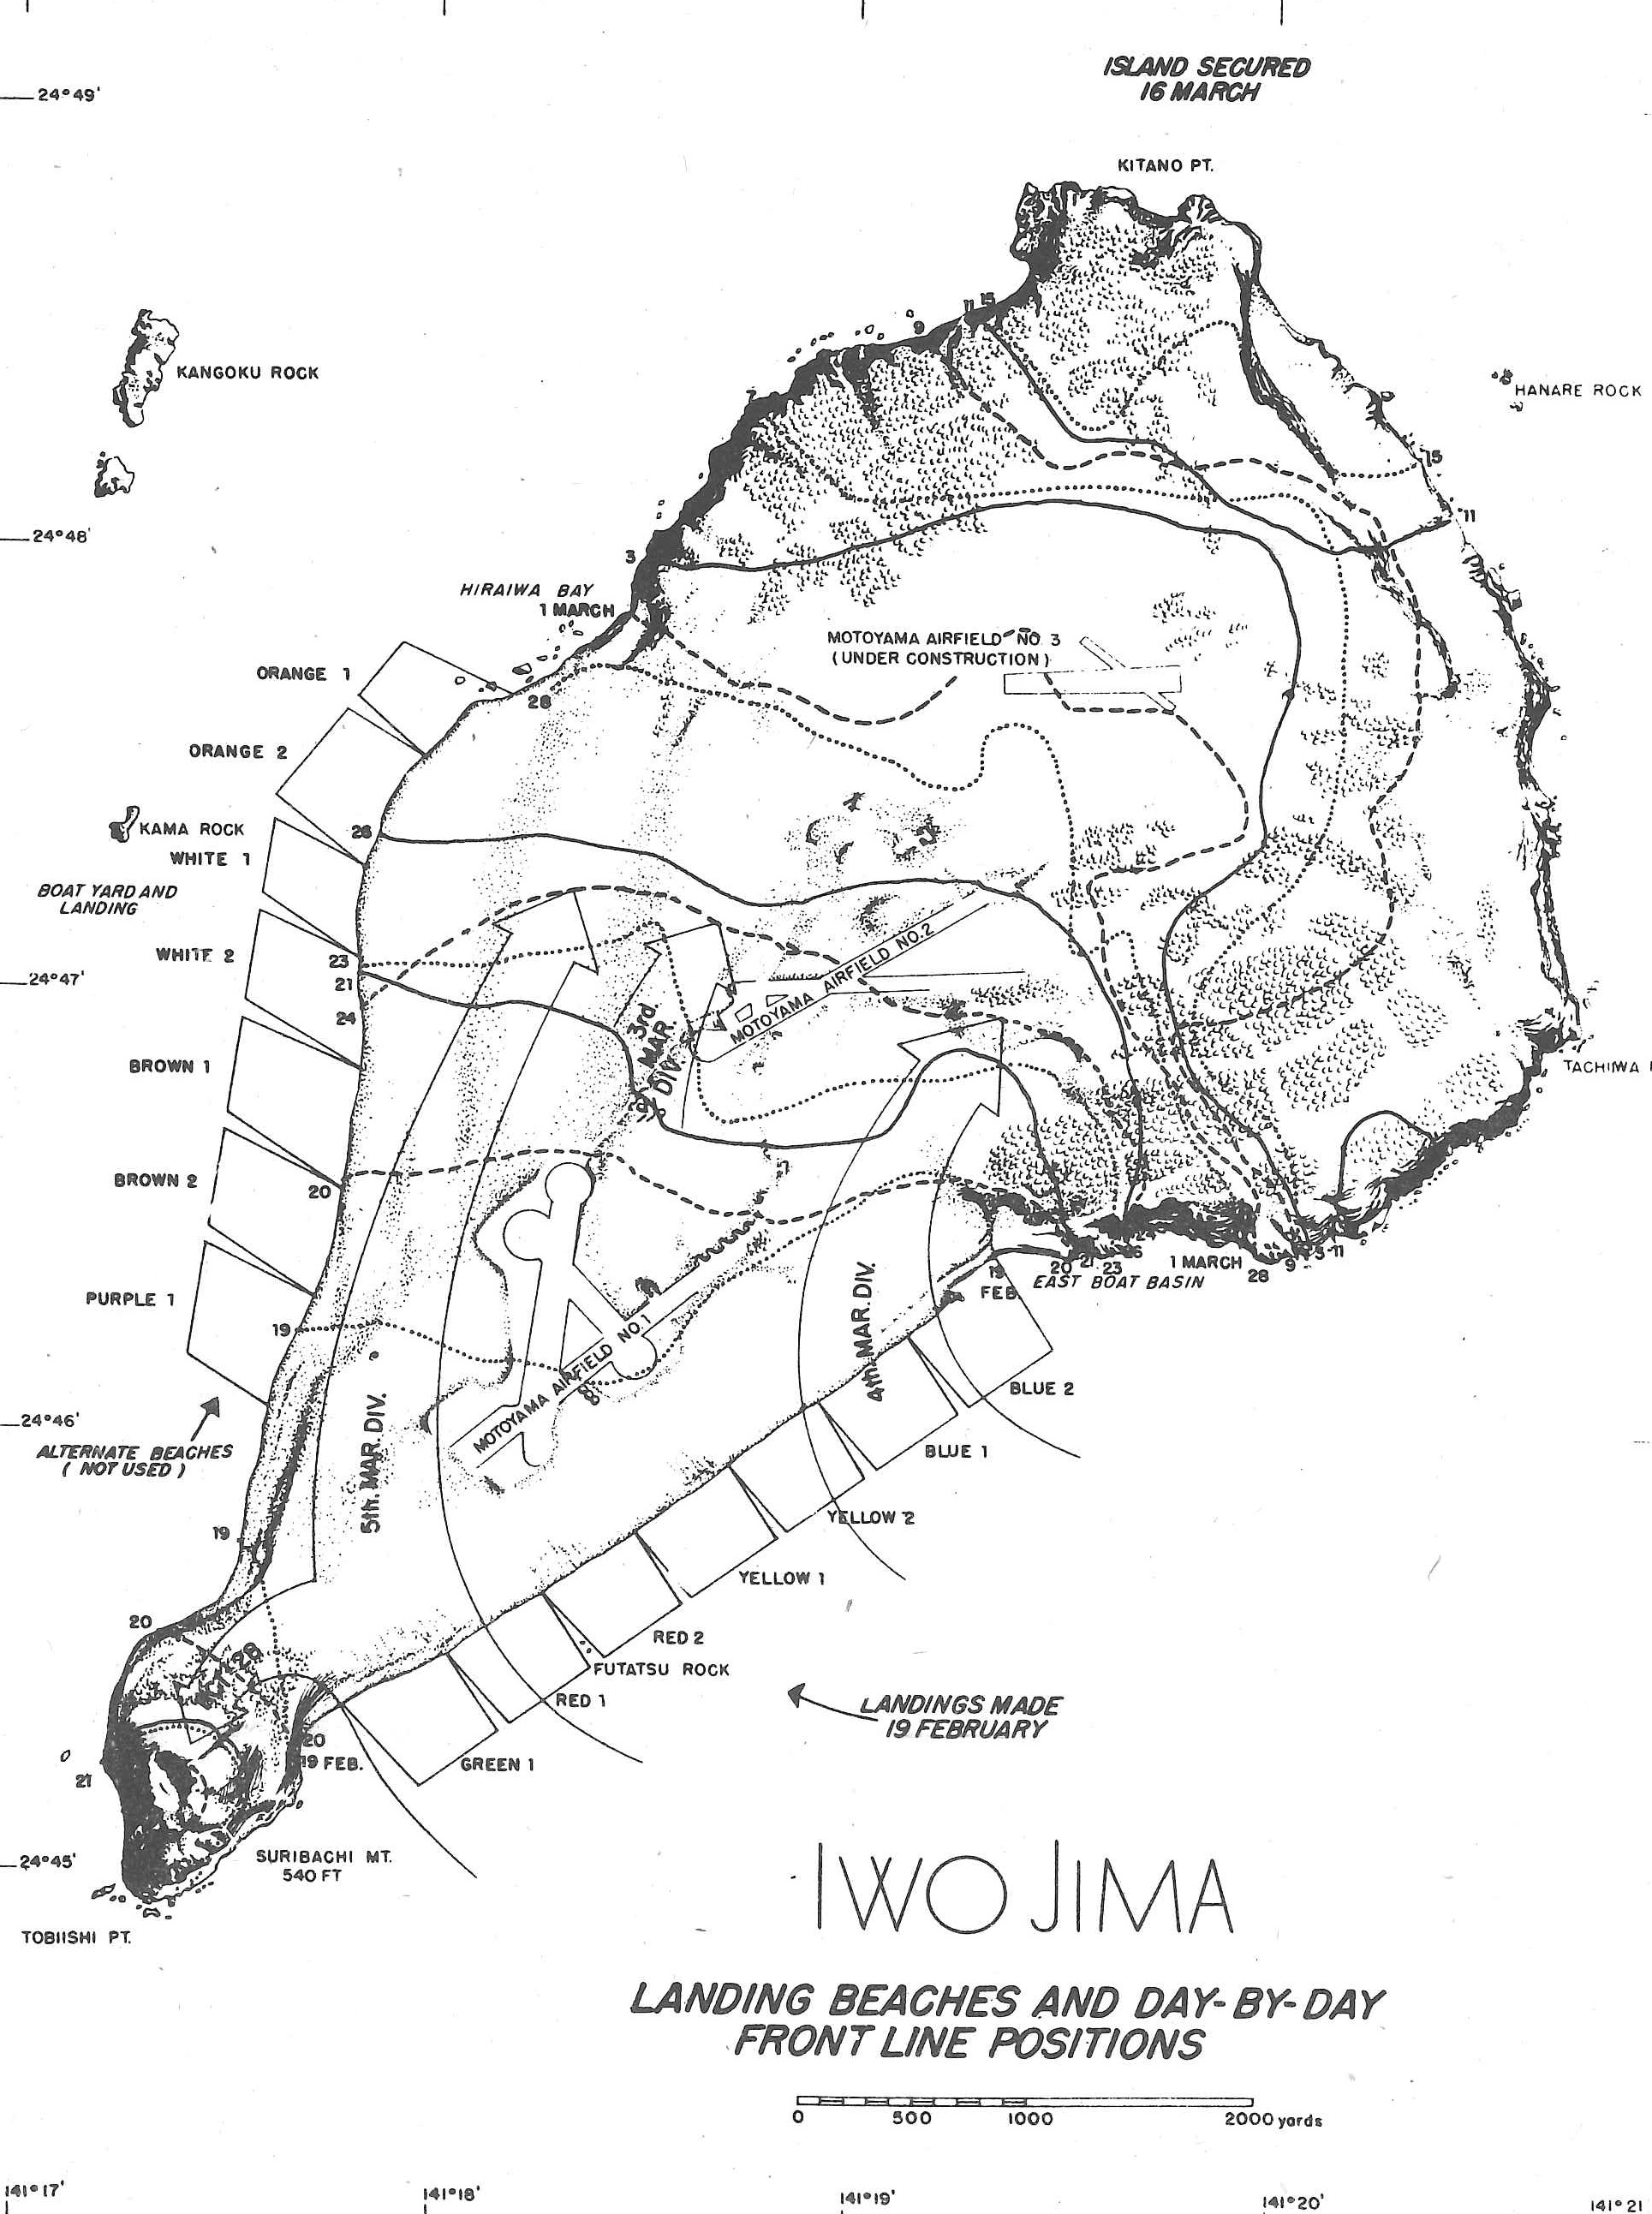 Official map of Iwo Jima showing the landing beaches on the southeast side of the island. (Coast Guard at War)